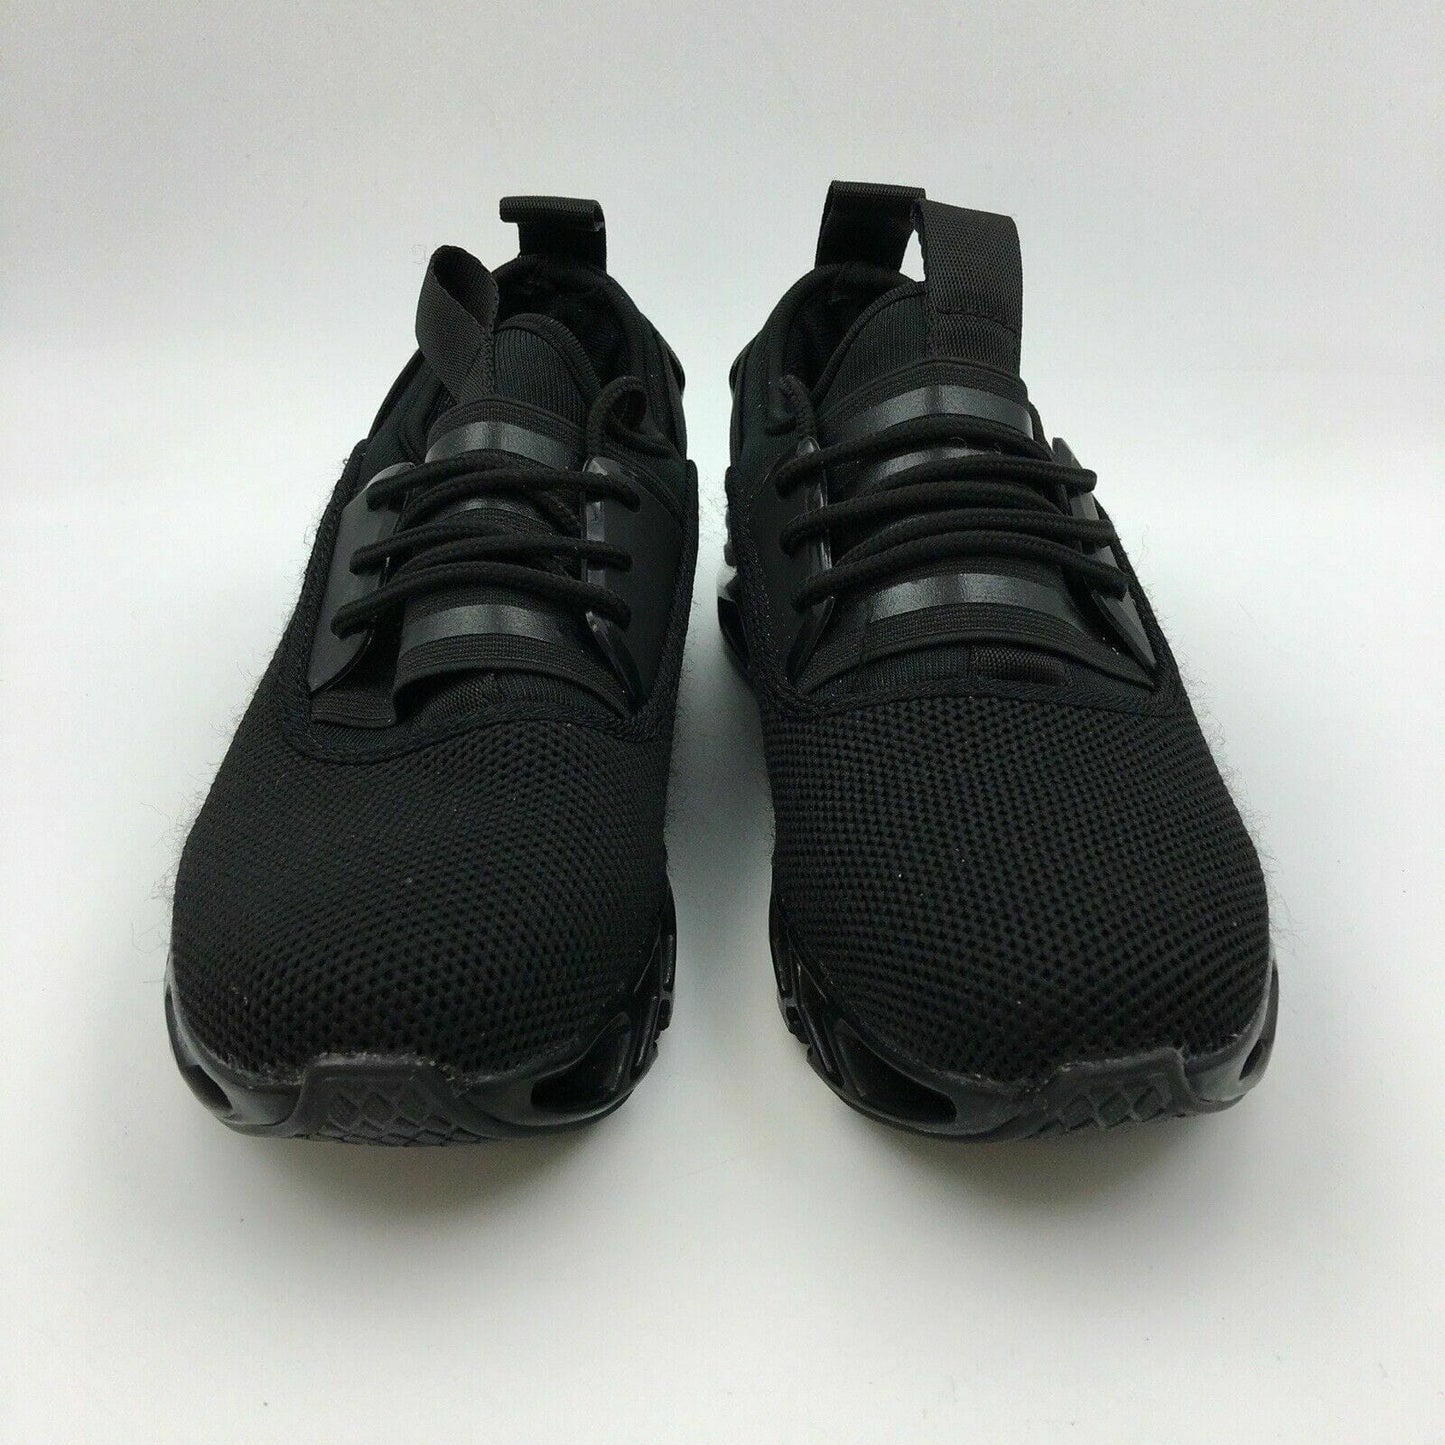 Cloud 1 Womens Size 5 Black Athletic Shoes Running Sneakers BM-AE19003 Comfort